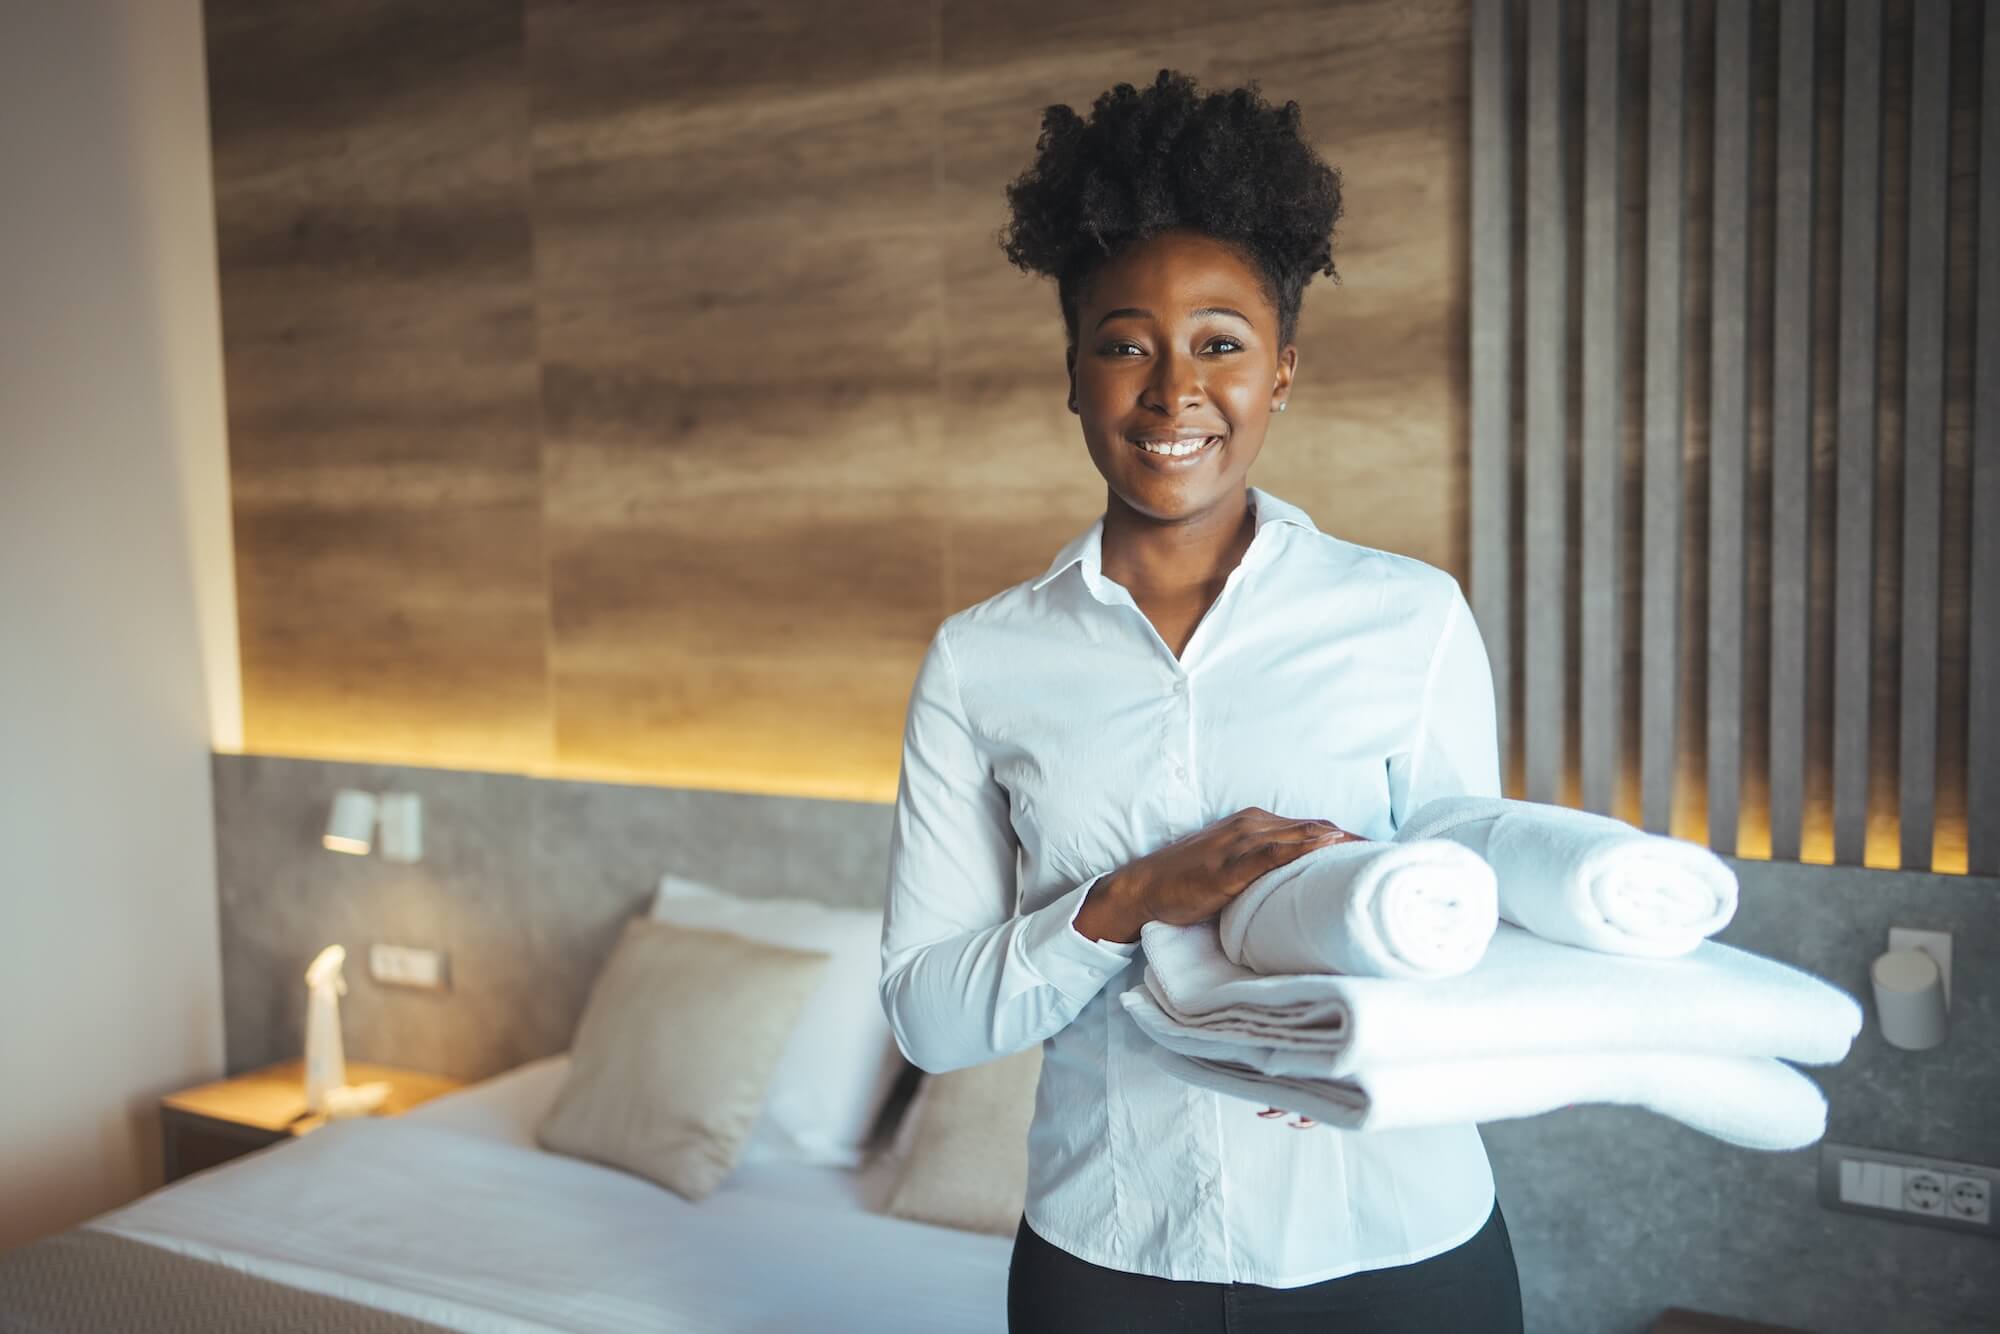 Duluth GA Housekeeping services, hire a housekeeper in Duluth GA, housekeeping services near me